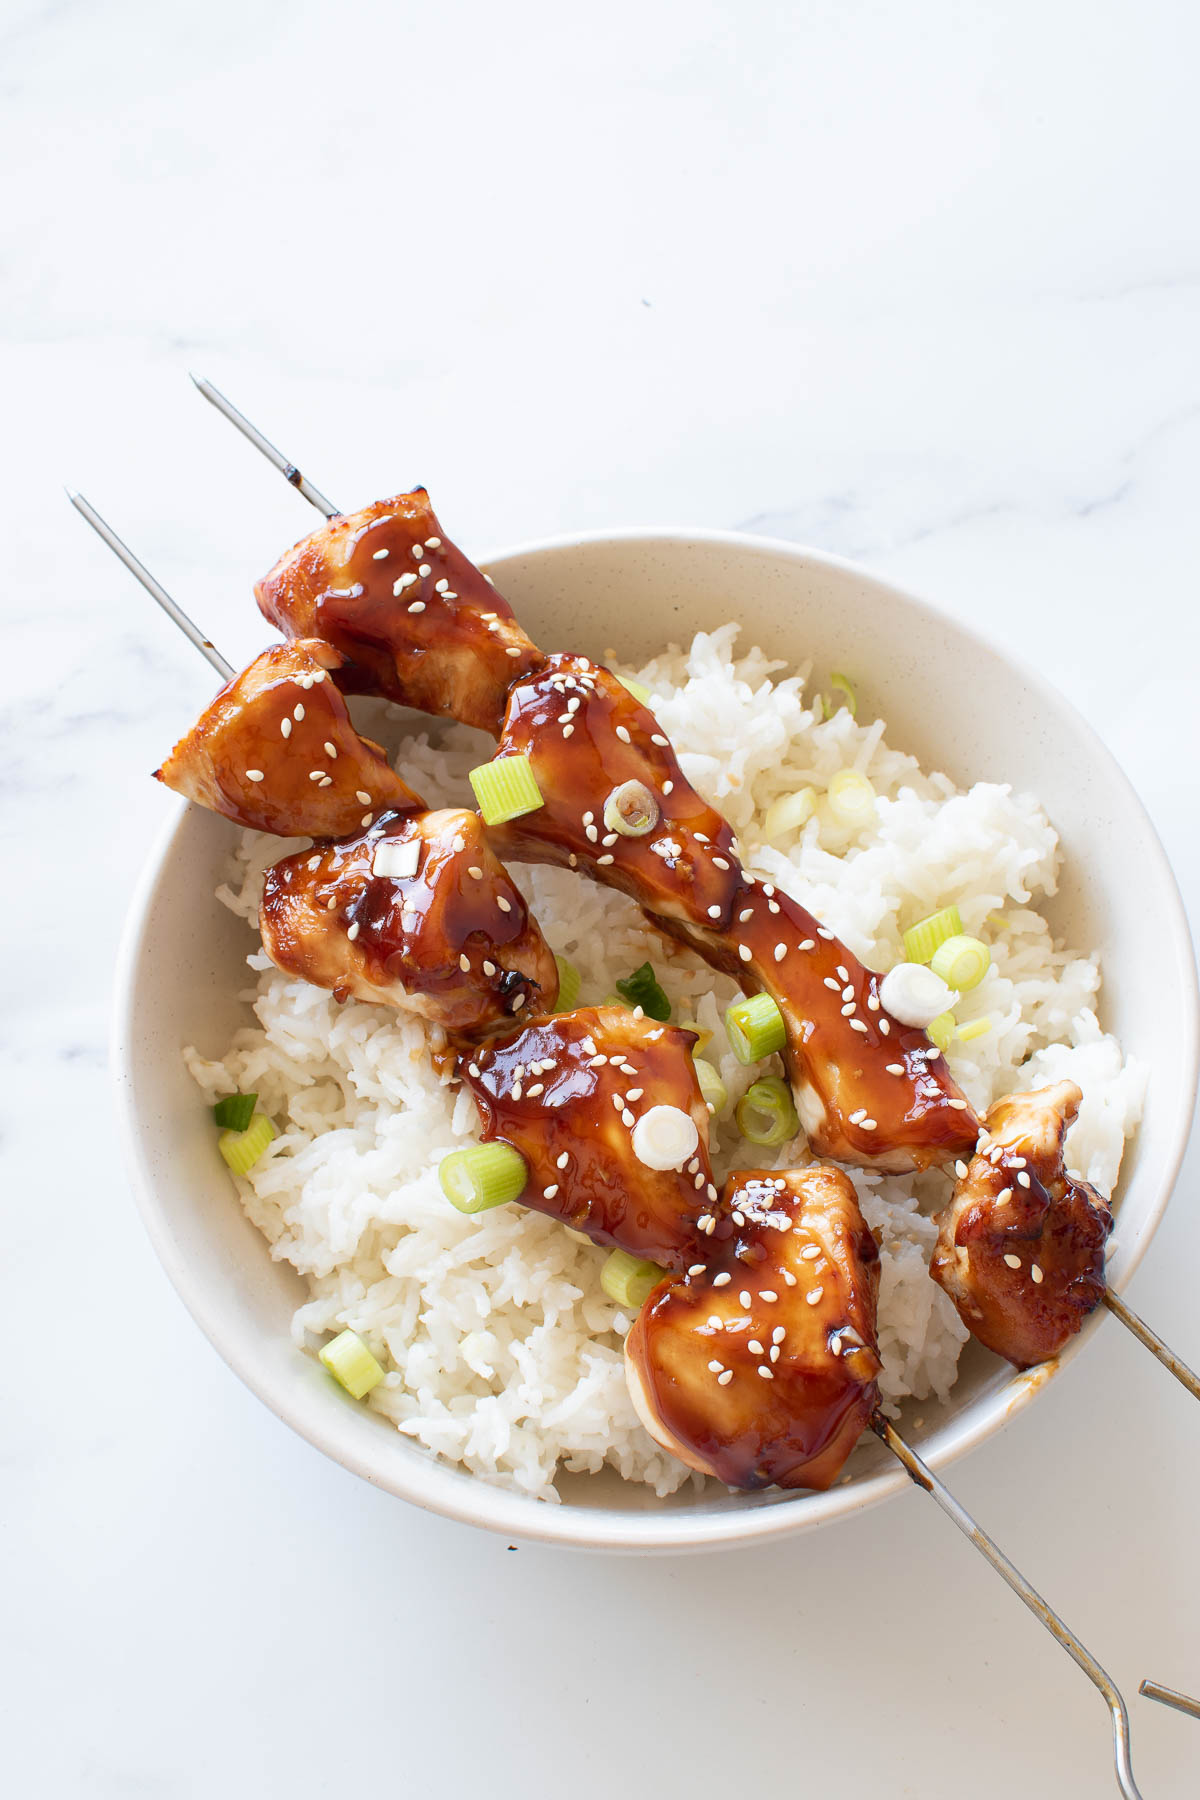 Chicken skewers and rice.